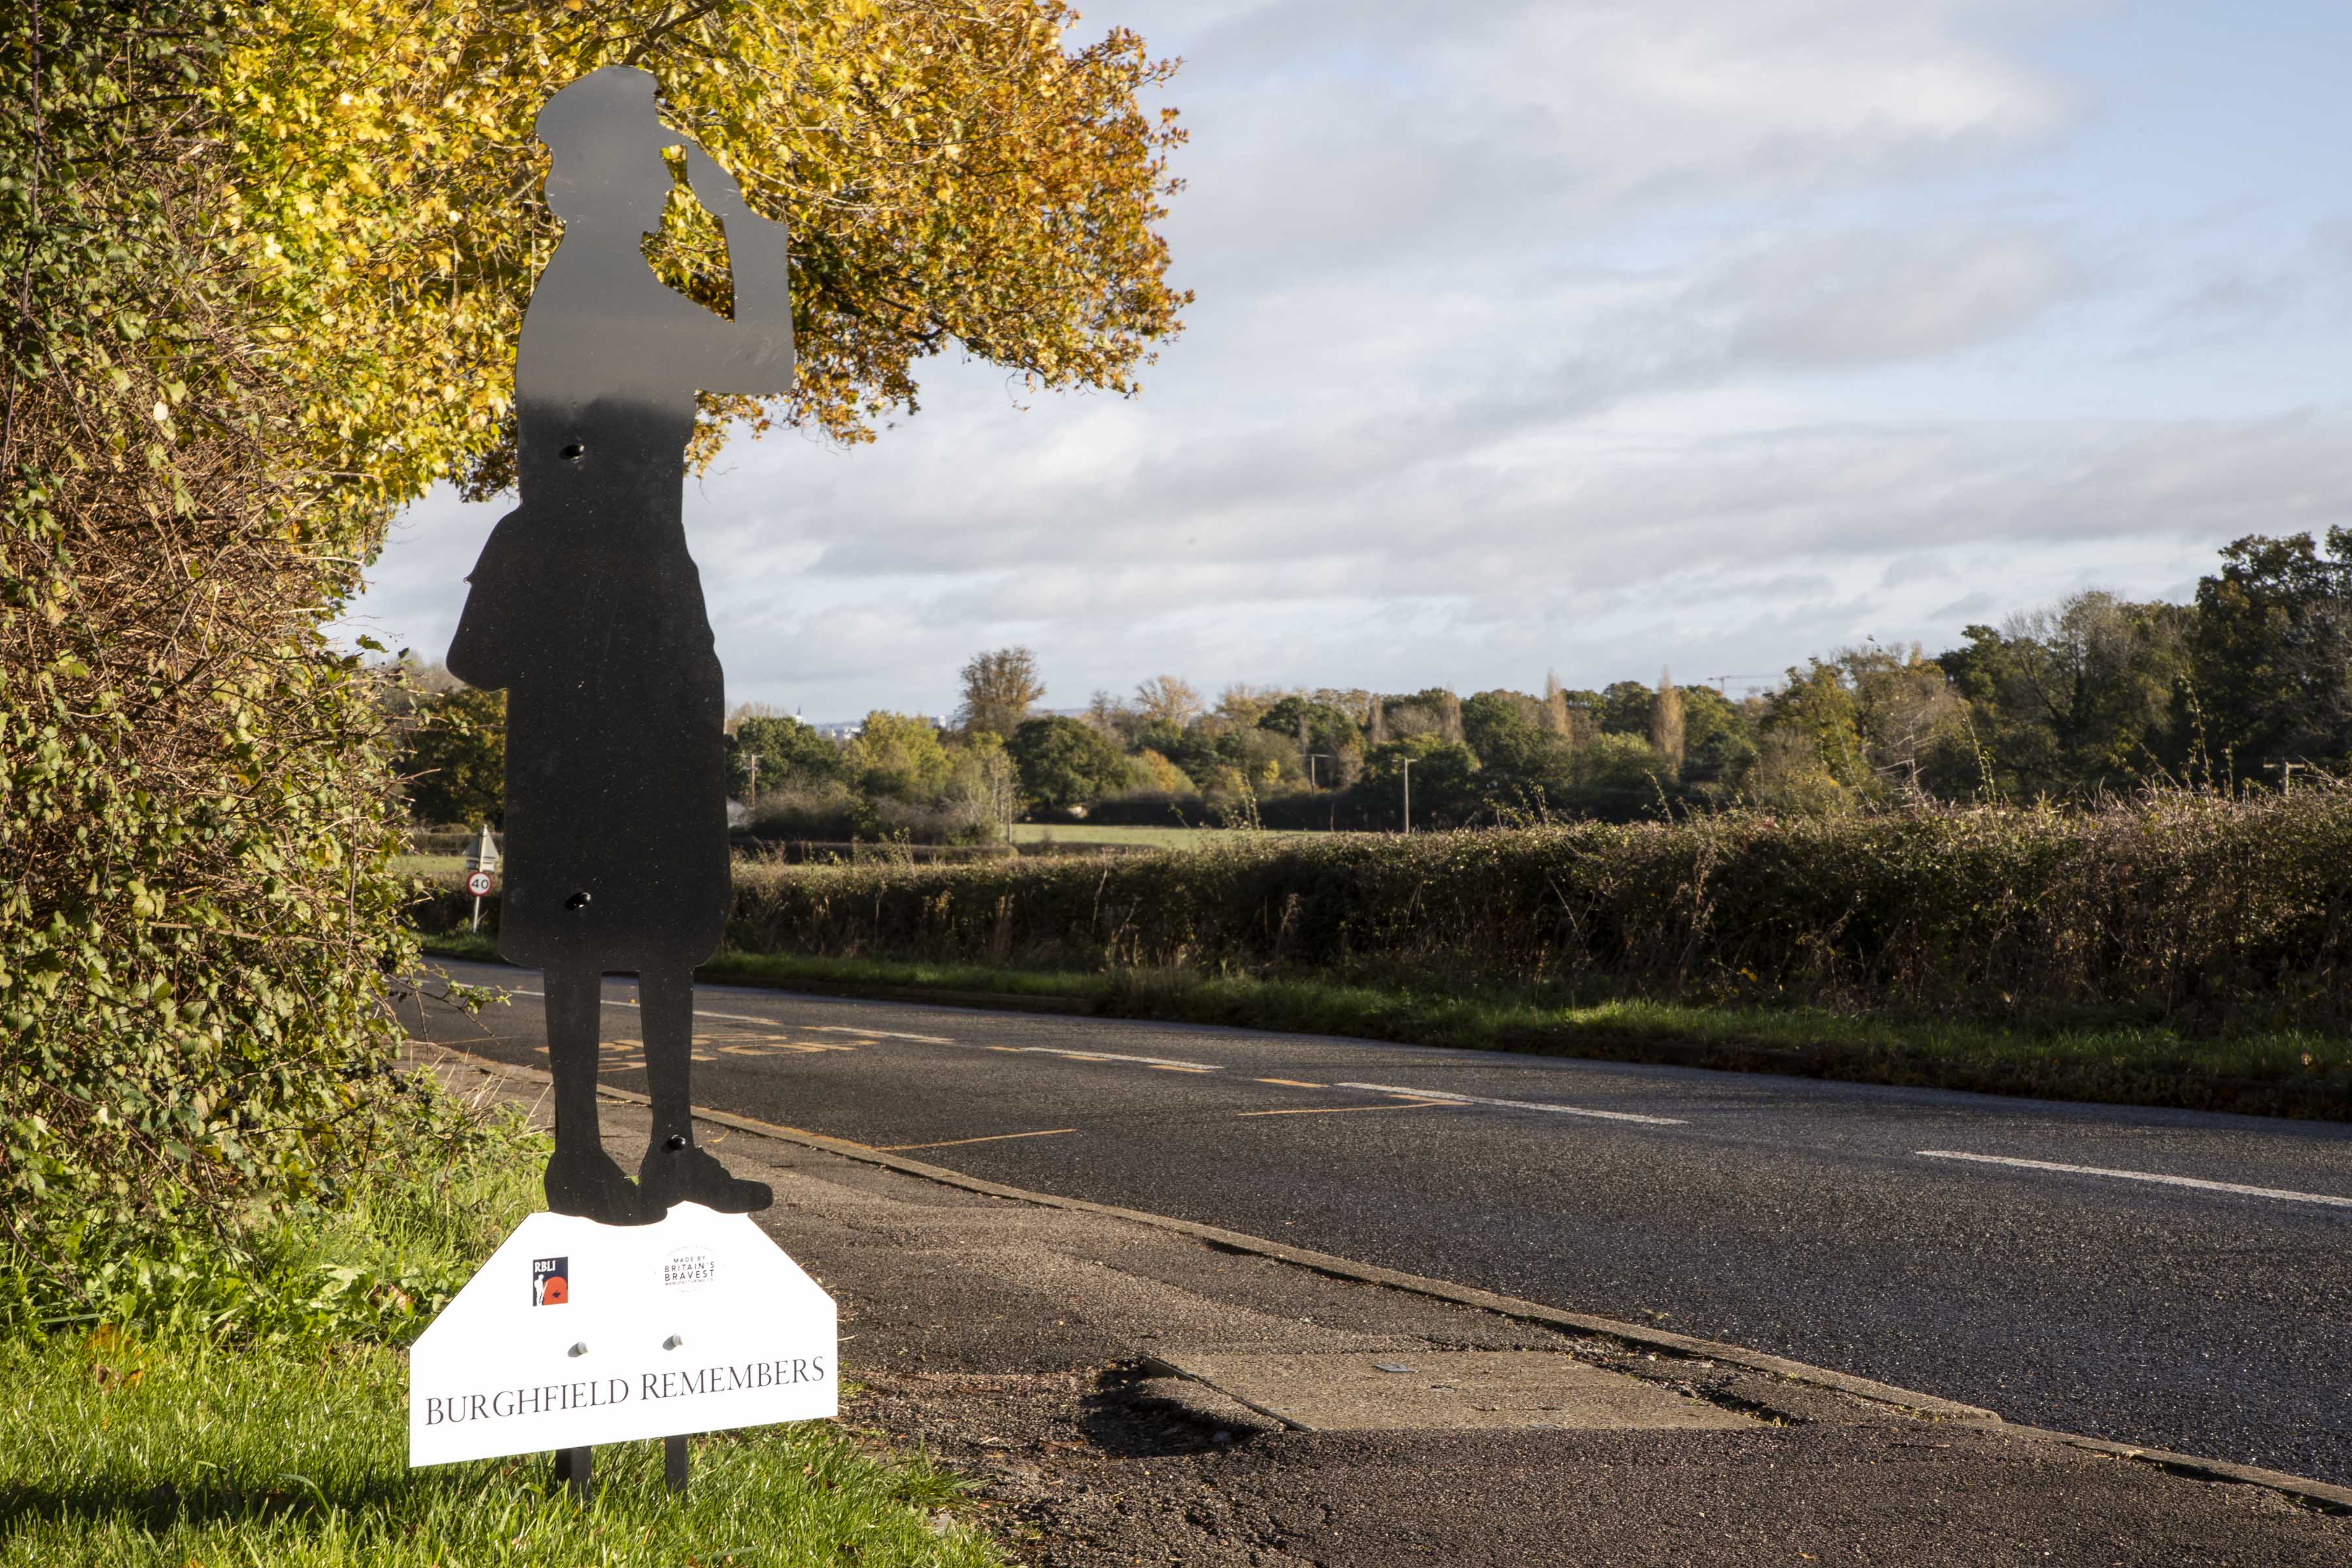 Image shows black silhouette statue by roadside.